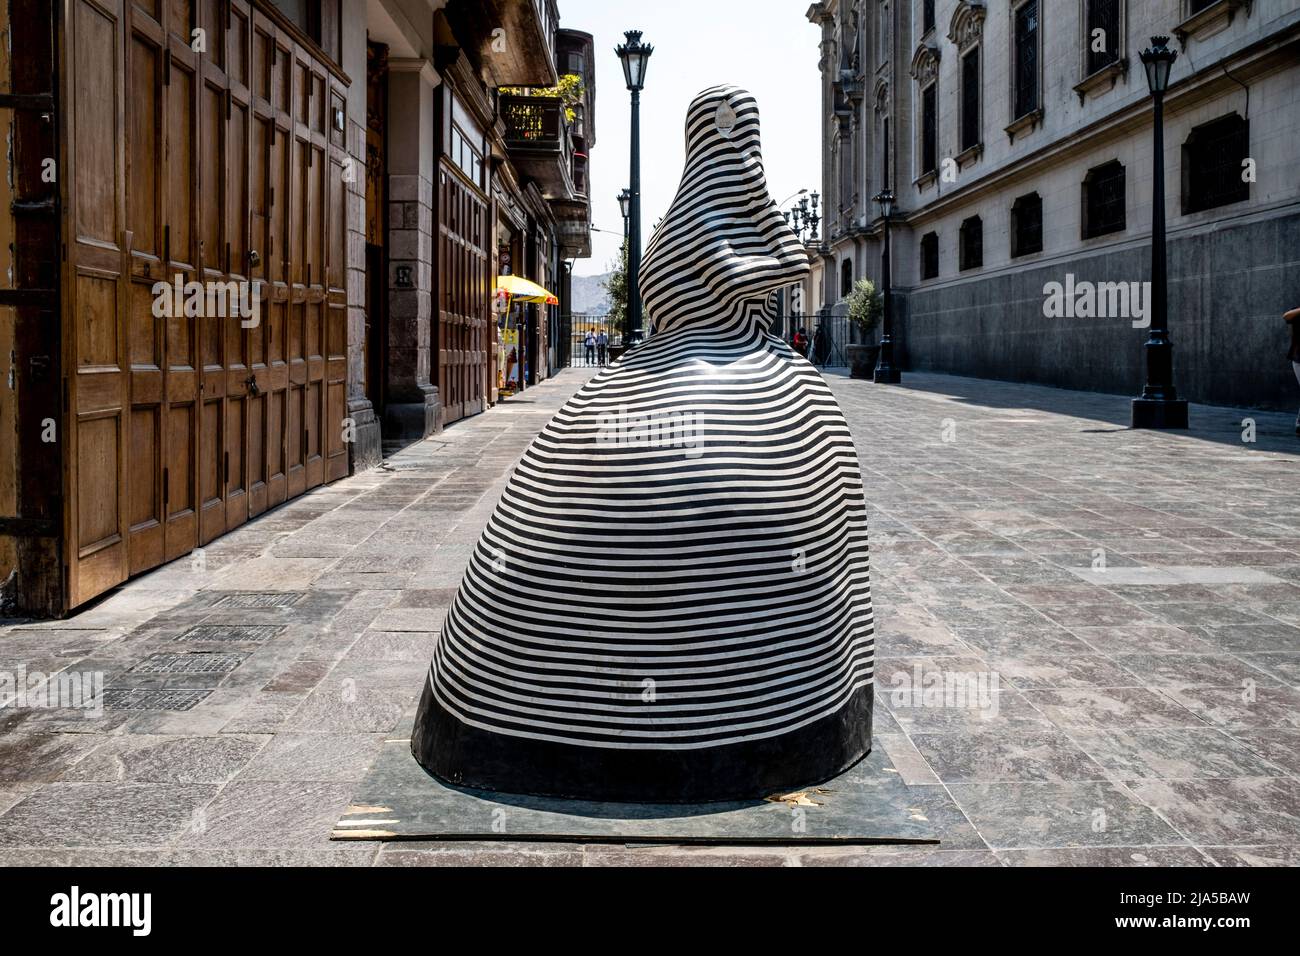 An Art Installation In The Historical Centre Of Lima, Lima, Peru. Stock Photo